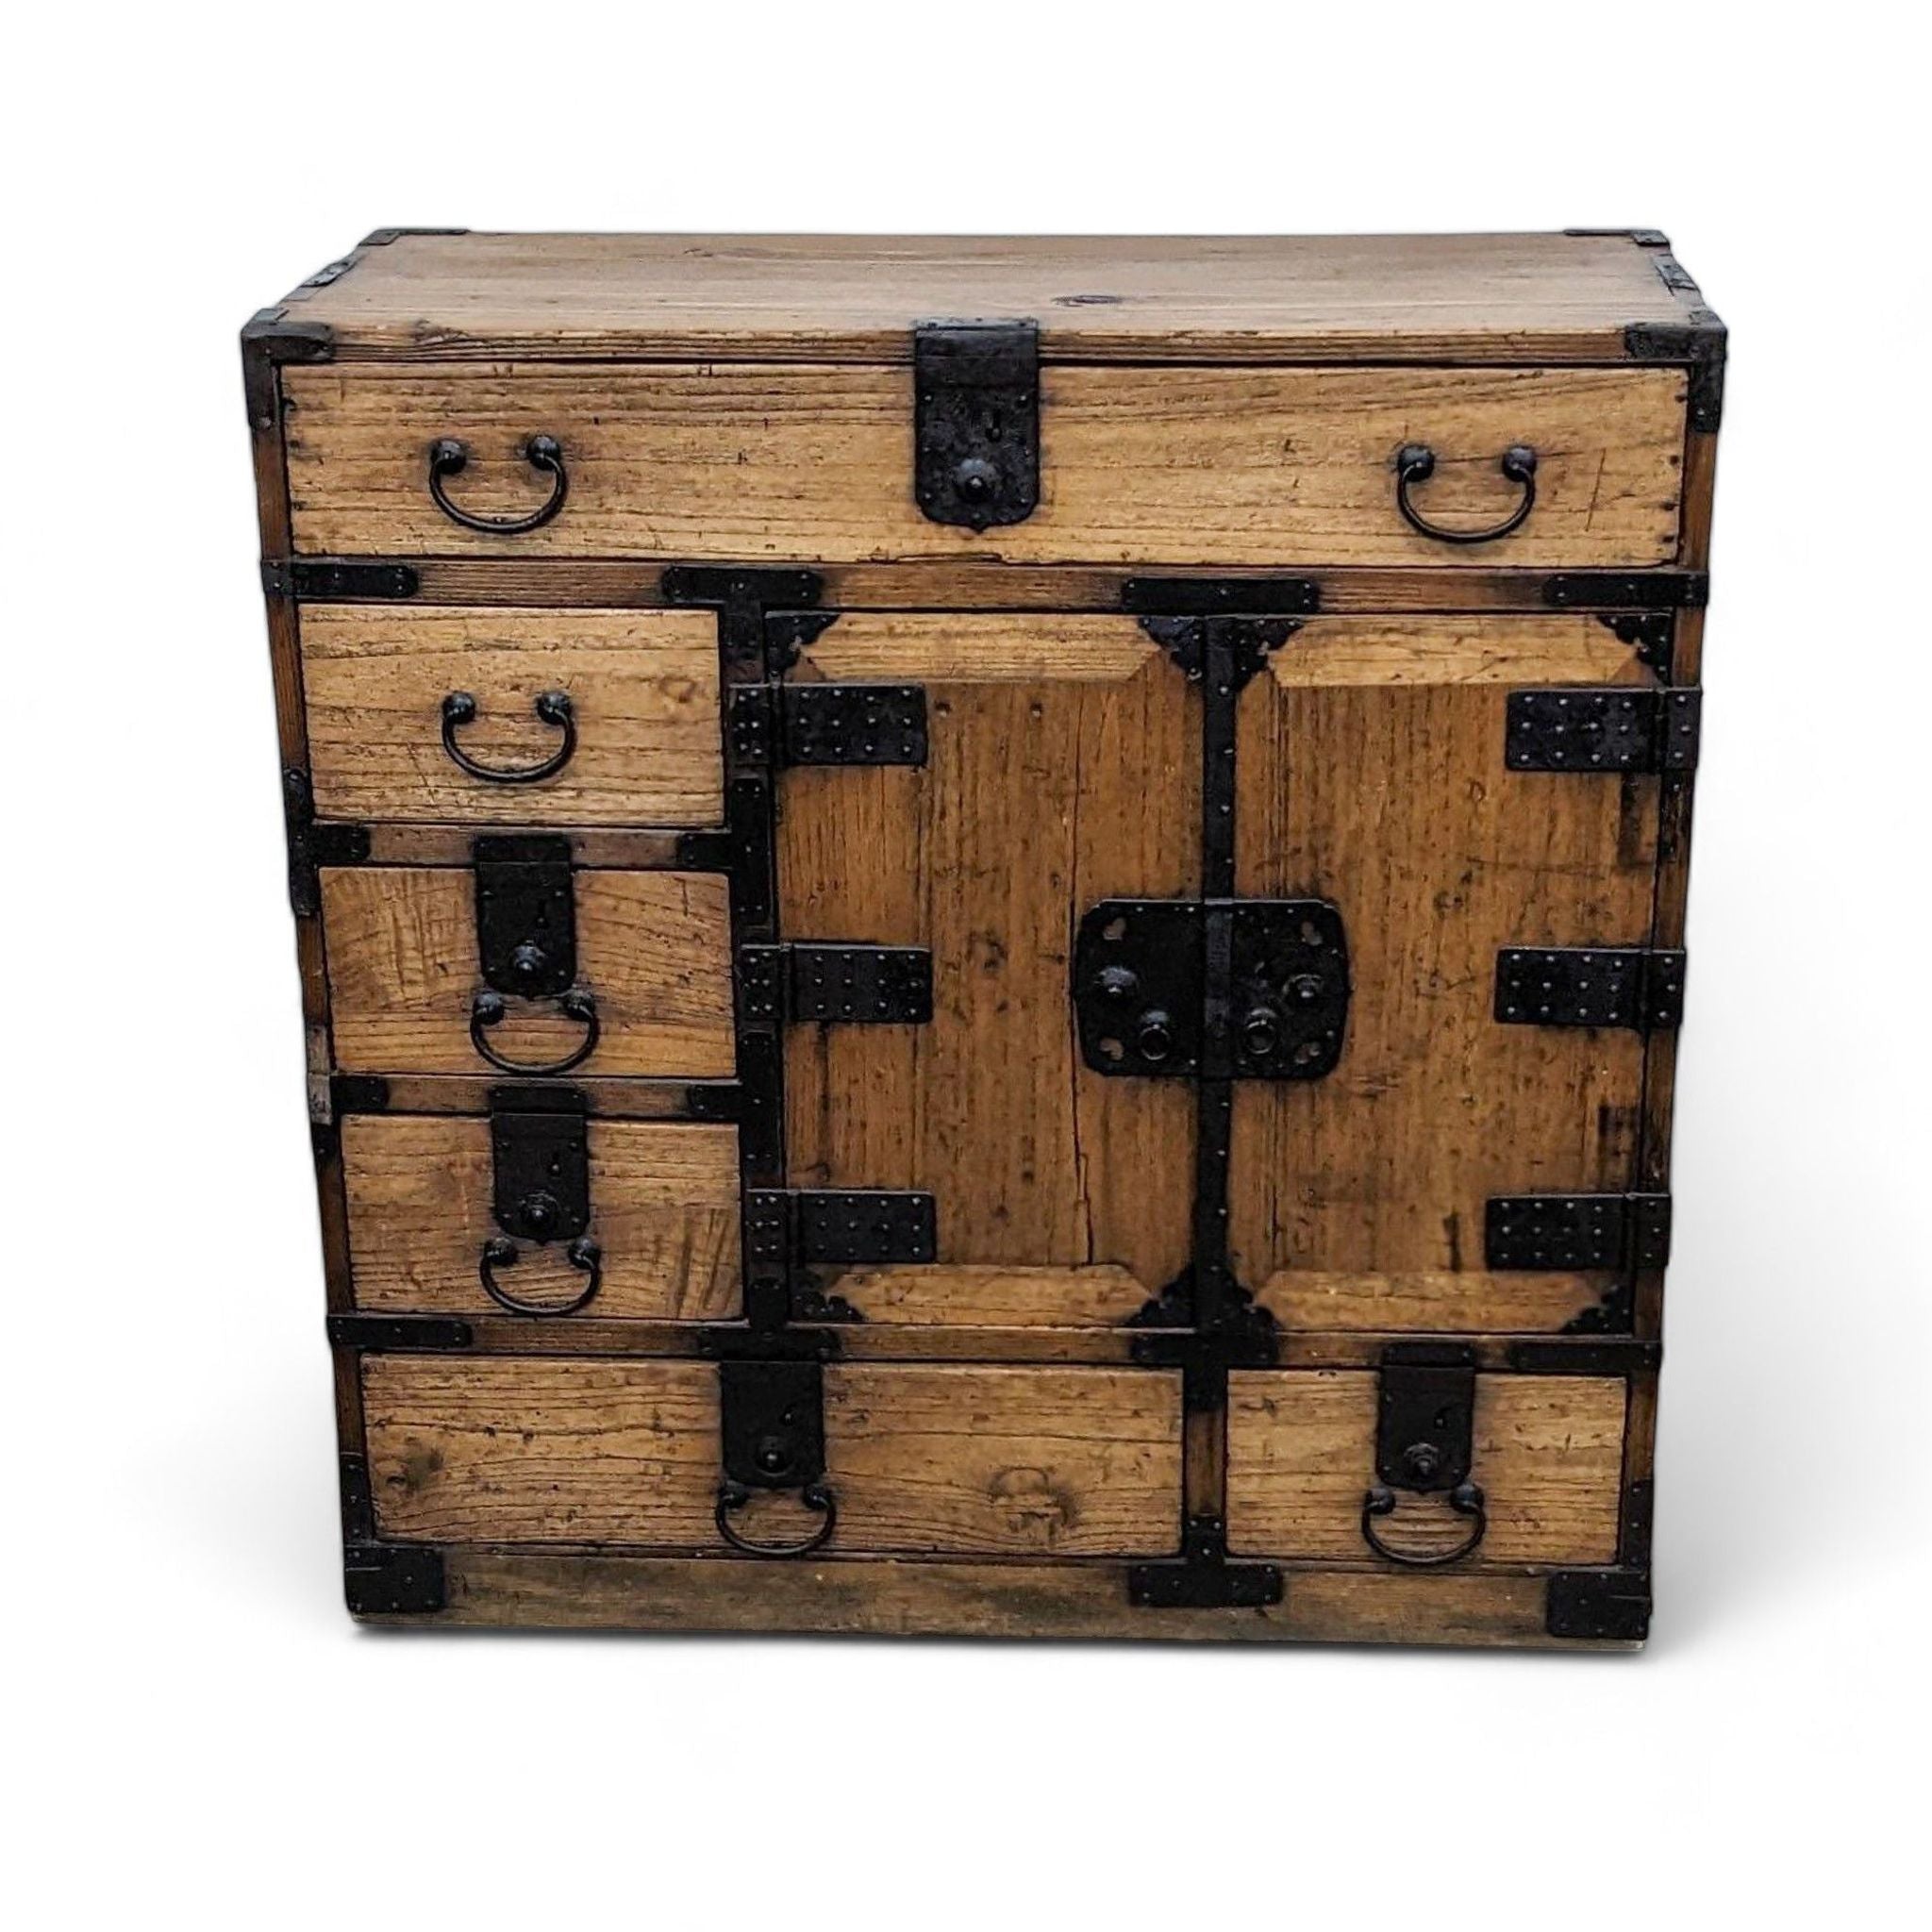 Reperch-branded traditional Japanese tansu with iron hardware and visible drawers.